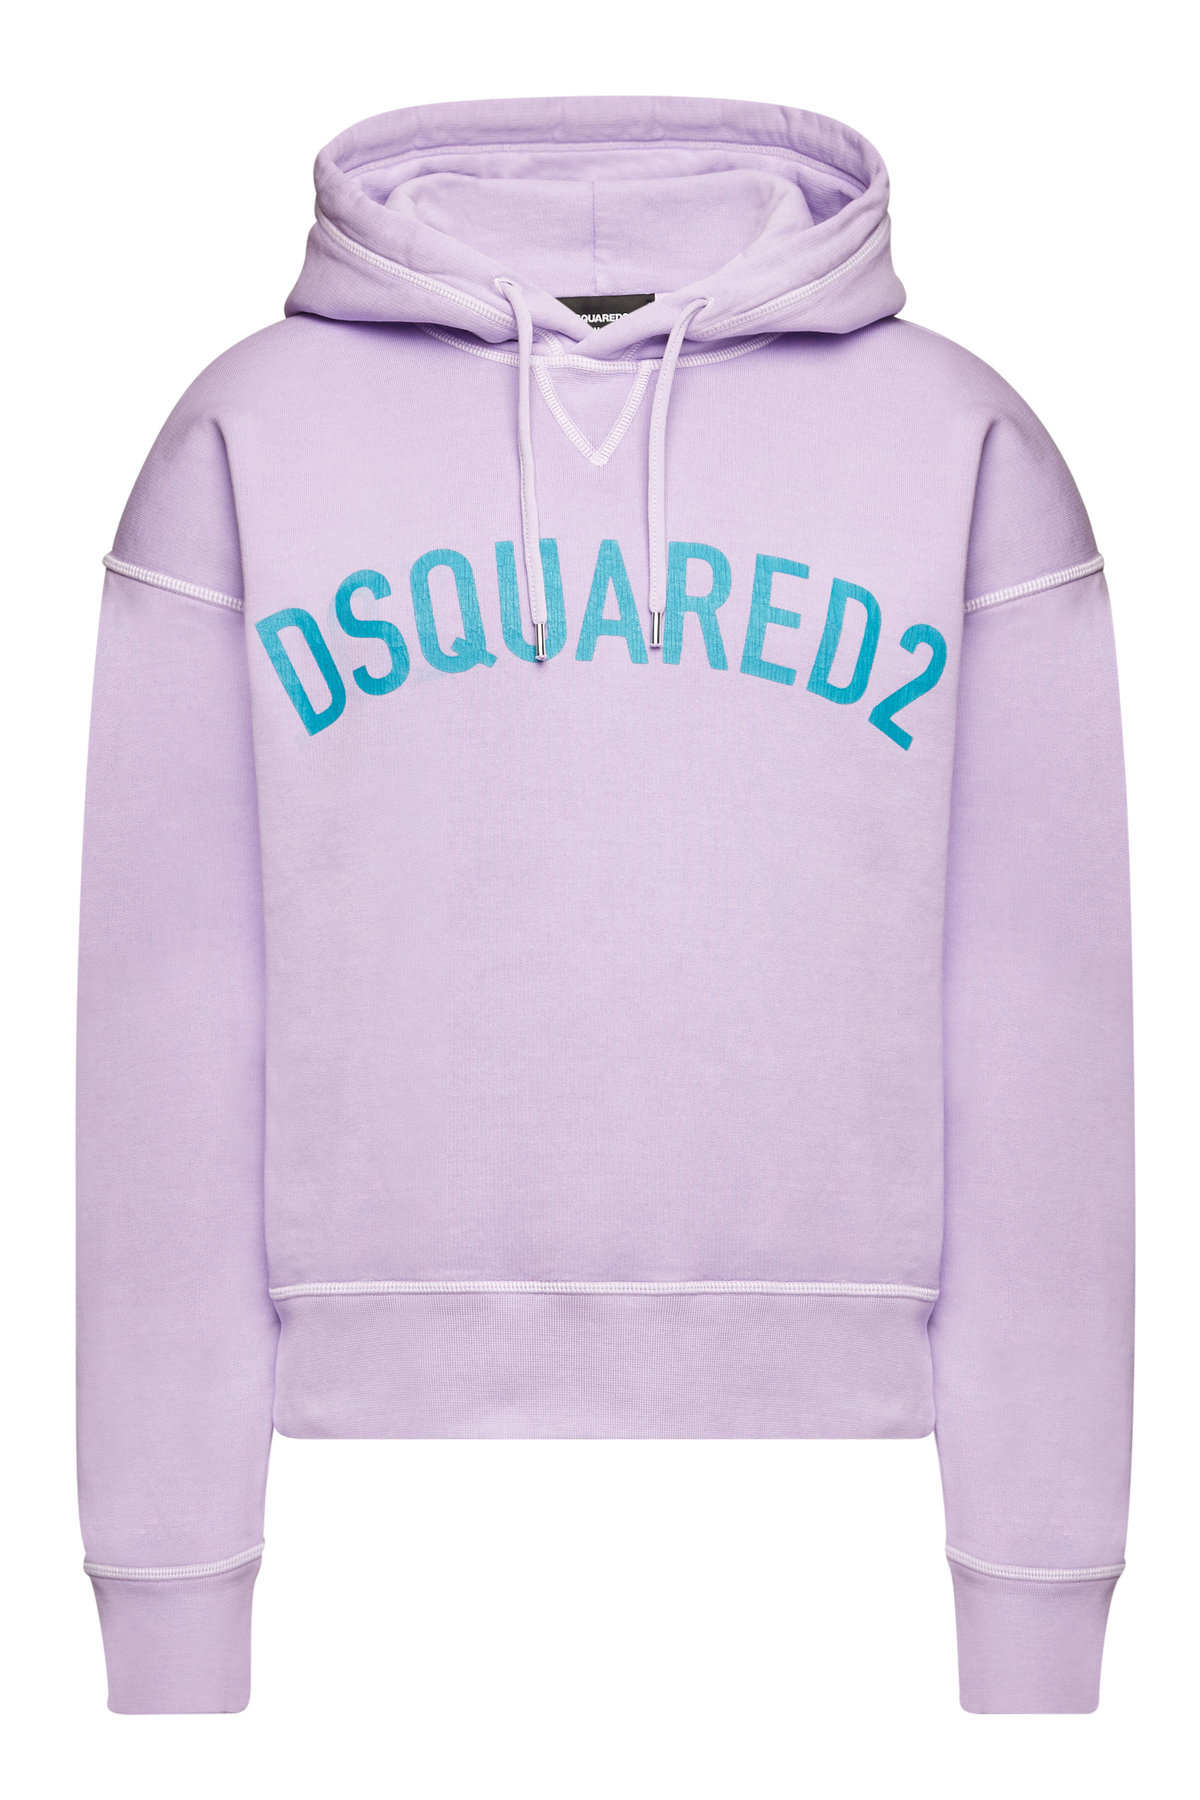 dsquared2 hoodie sale